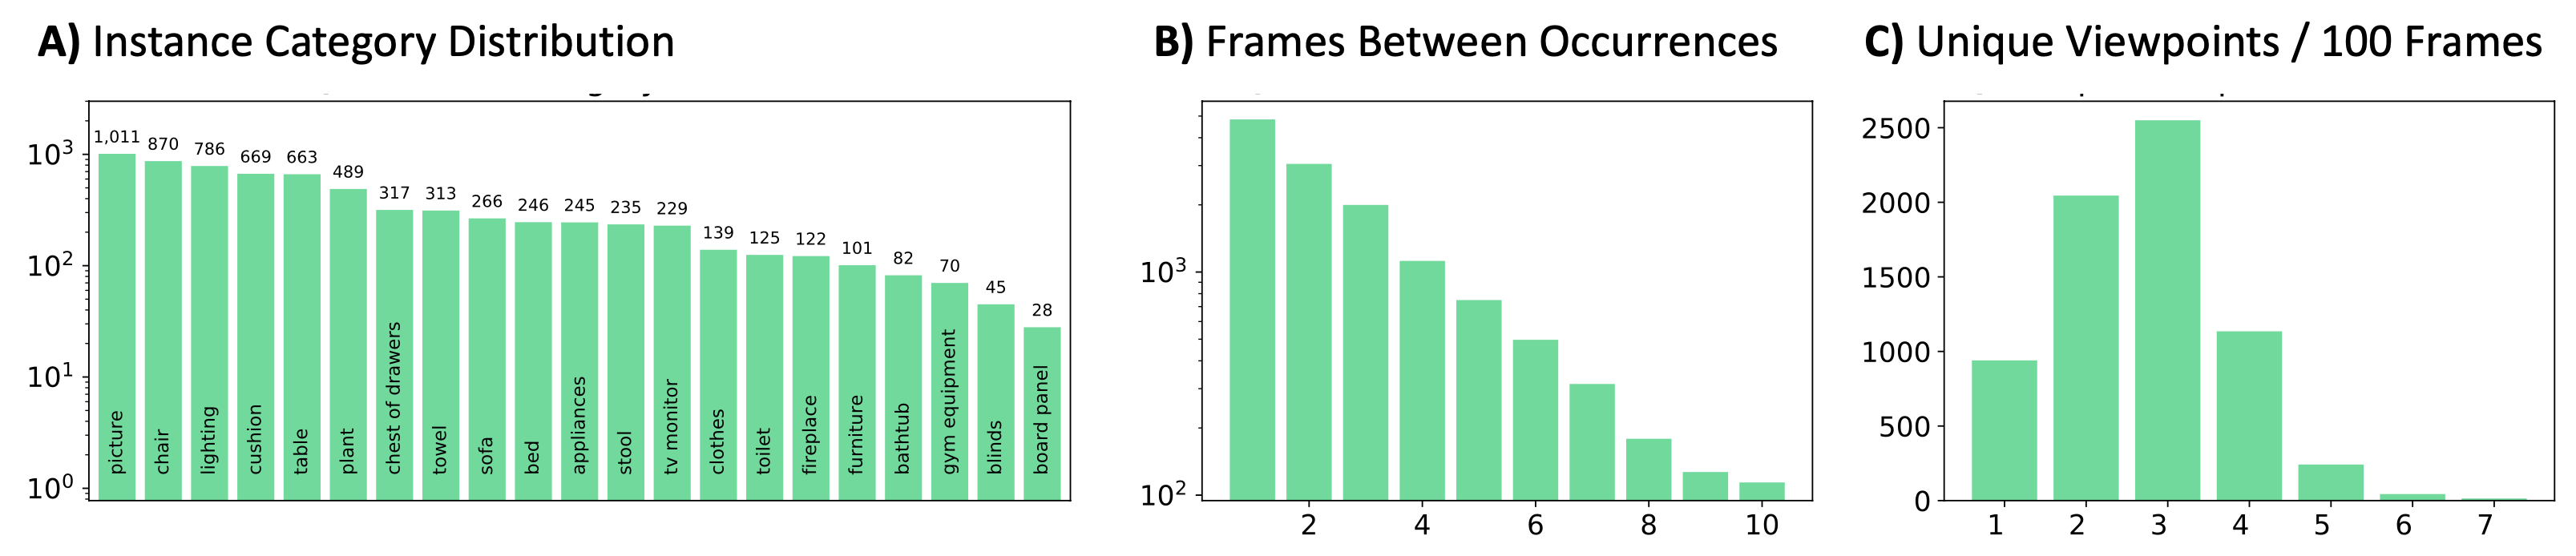 
Plots show a natural long tail distribution of instances grouped into categories. An
average sequence has 3 different view points. Sequences are highly correlated in time but revisits
are not uncommon. 